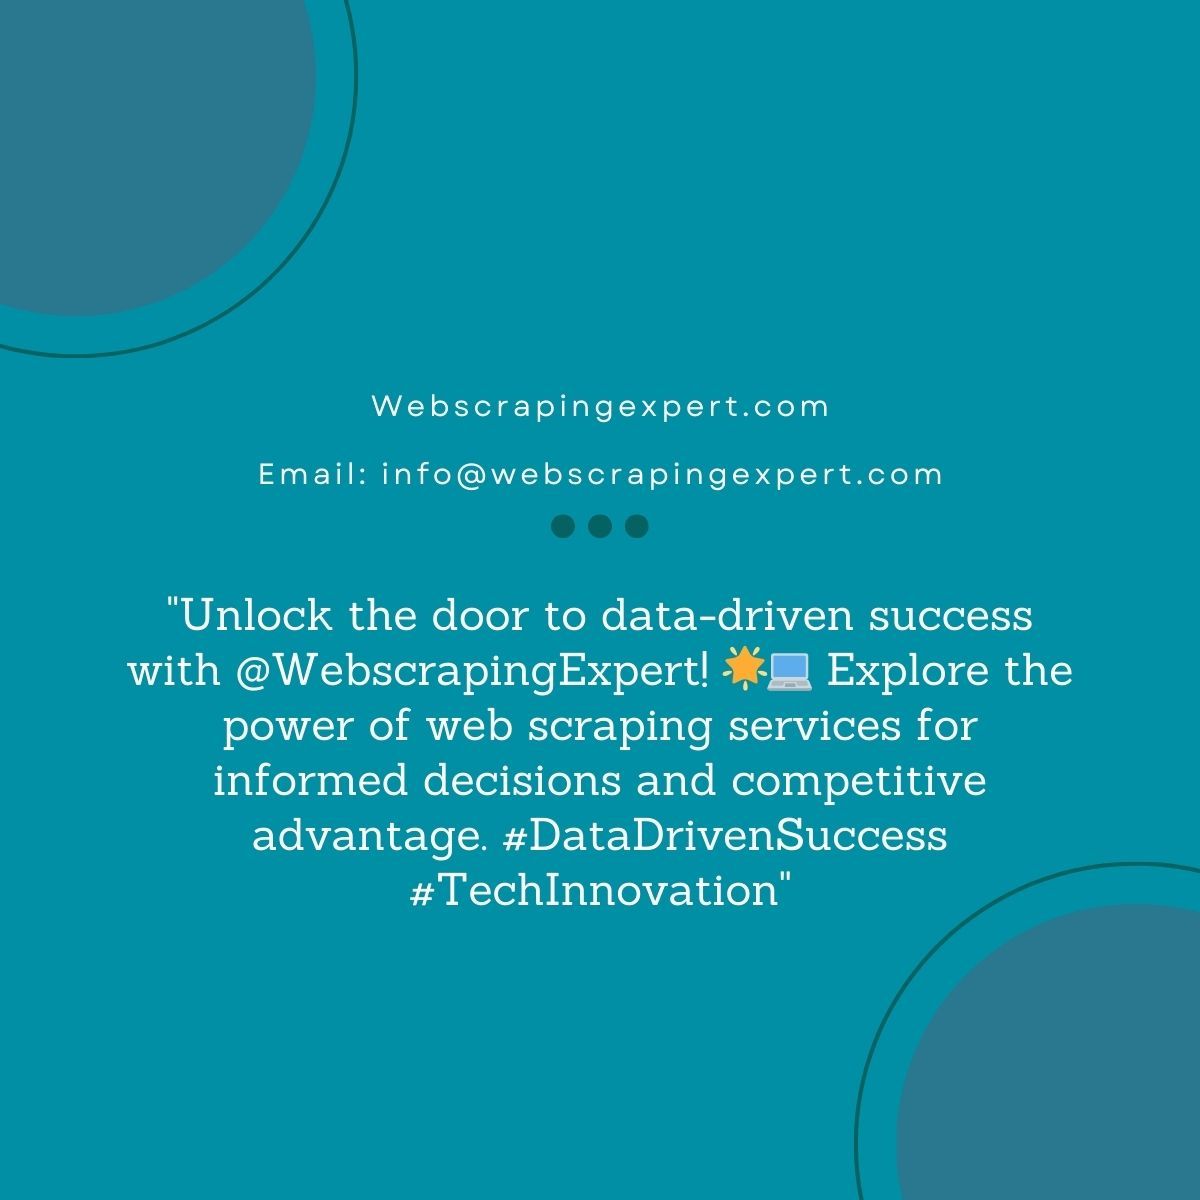 Unlock the door to strategic growth with @WebscrapingExpert's latest trends in web scraping services! 🌟🚀 Explore the power of data for informed decisions and competitive advantage. #DataDrivenGrowth #TechInnovation